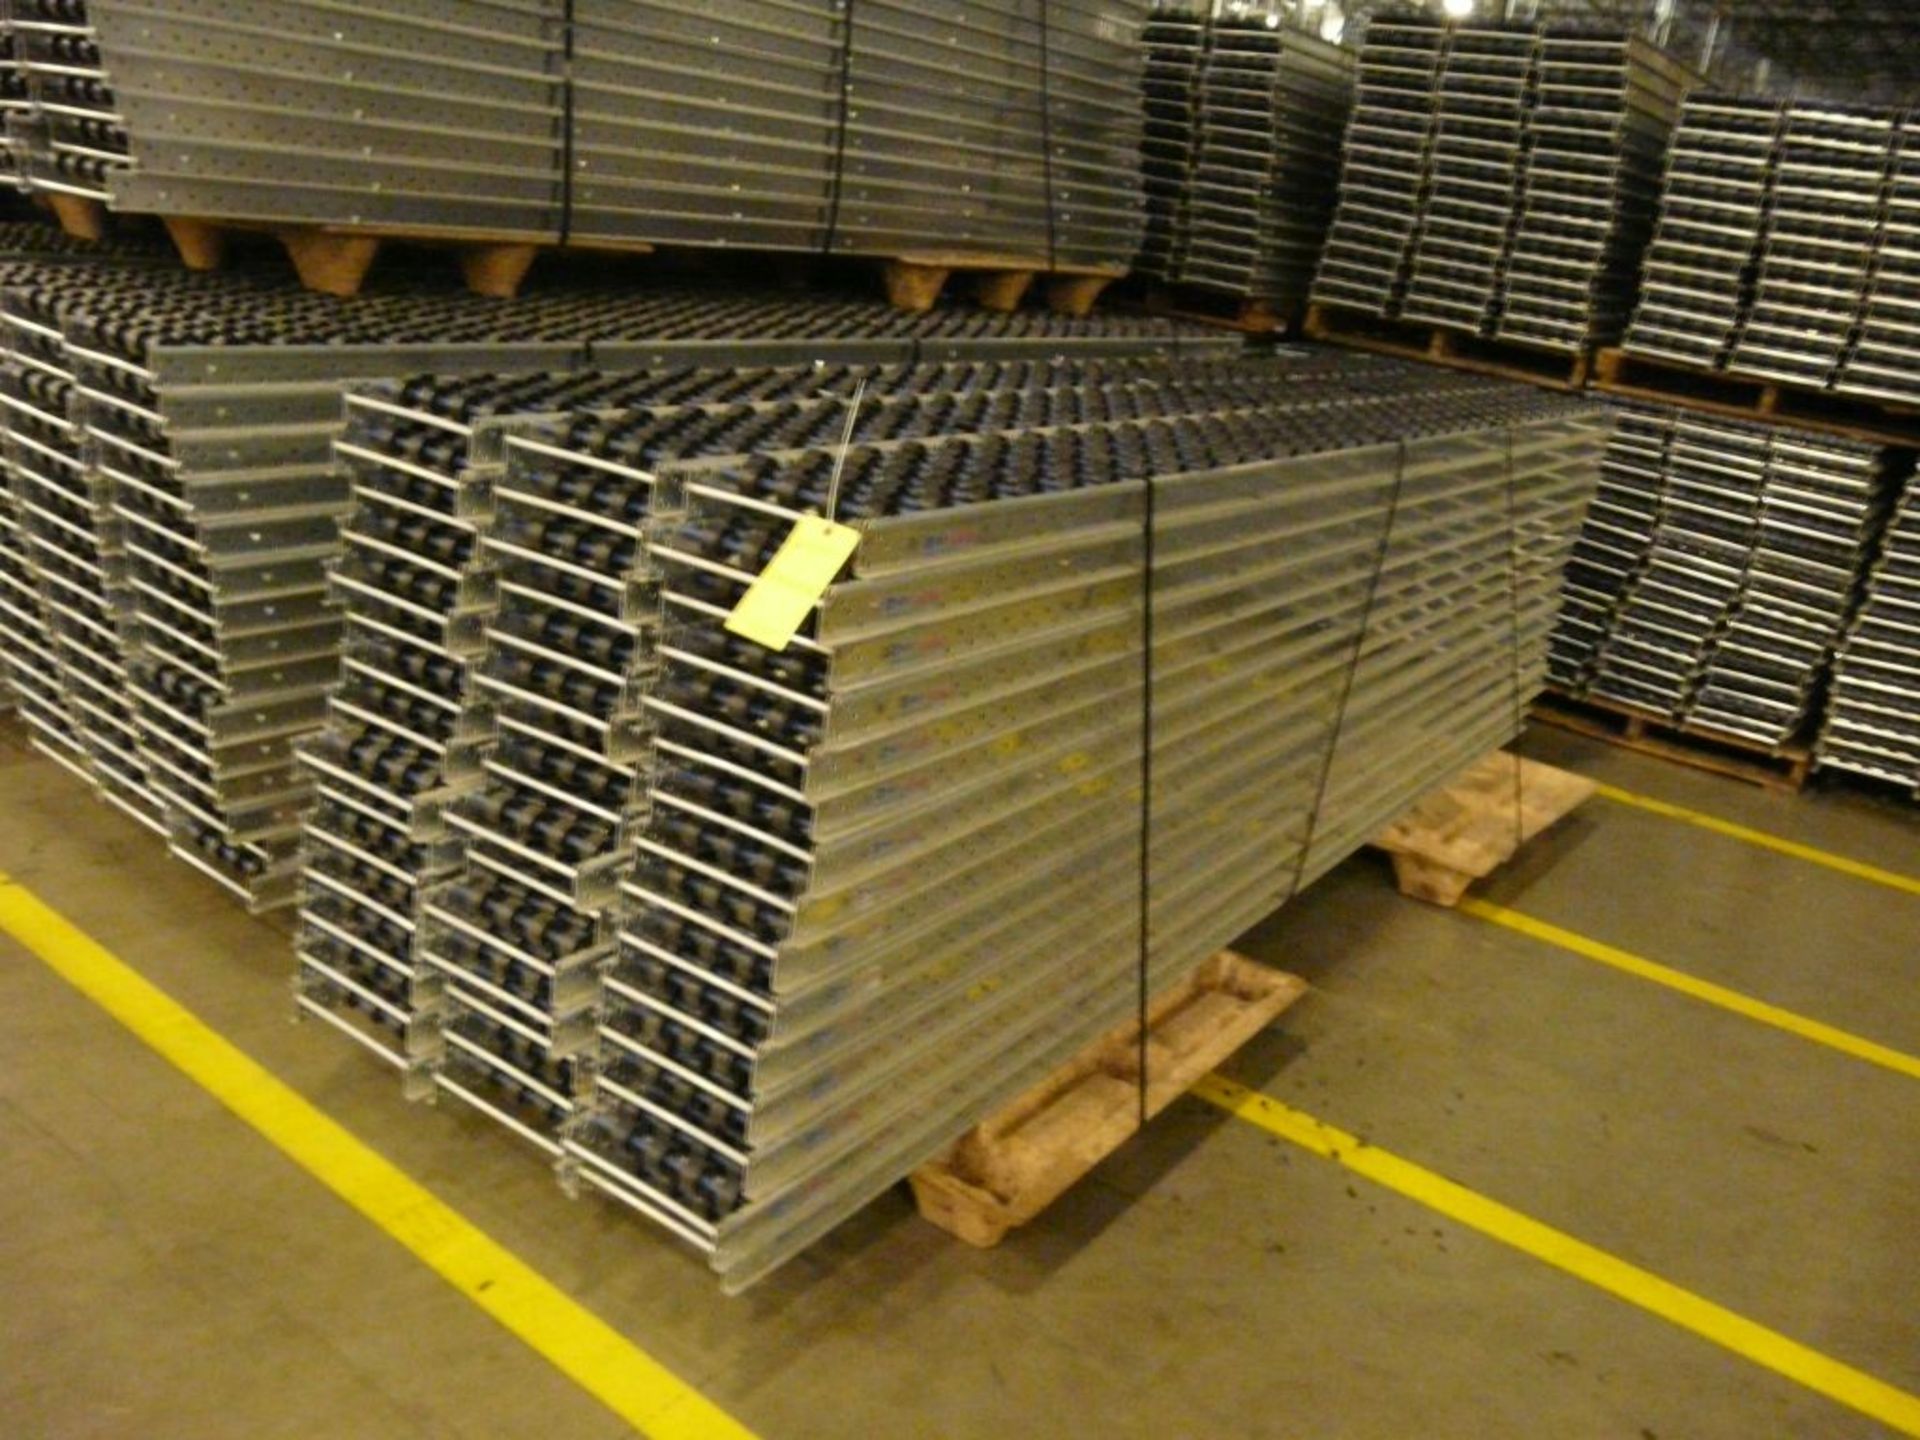 Lot of (90) SpanTrack Wheelbed Carton Flow Conveyors - 11.5'L x 11"W; Tag: 223629 - $30 Lot